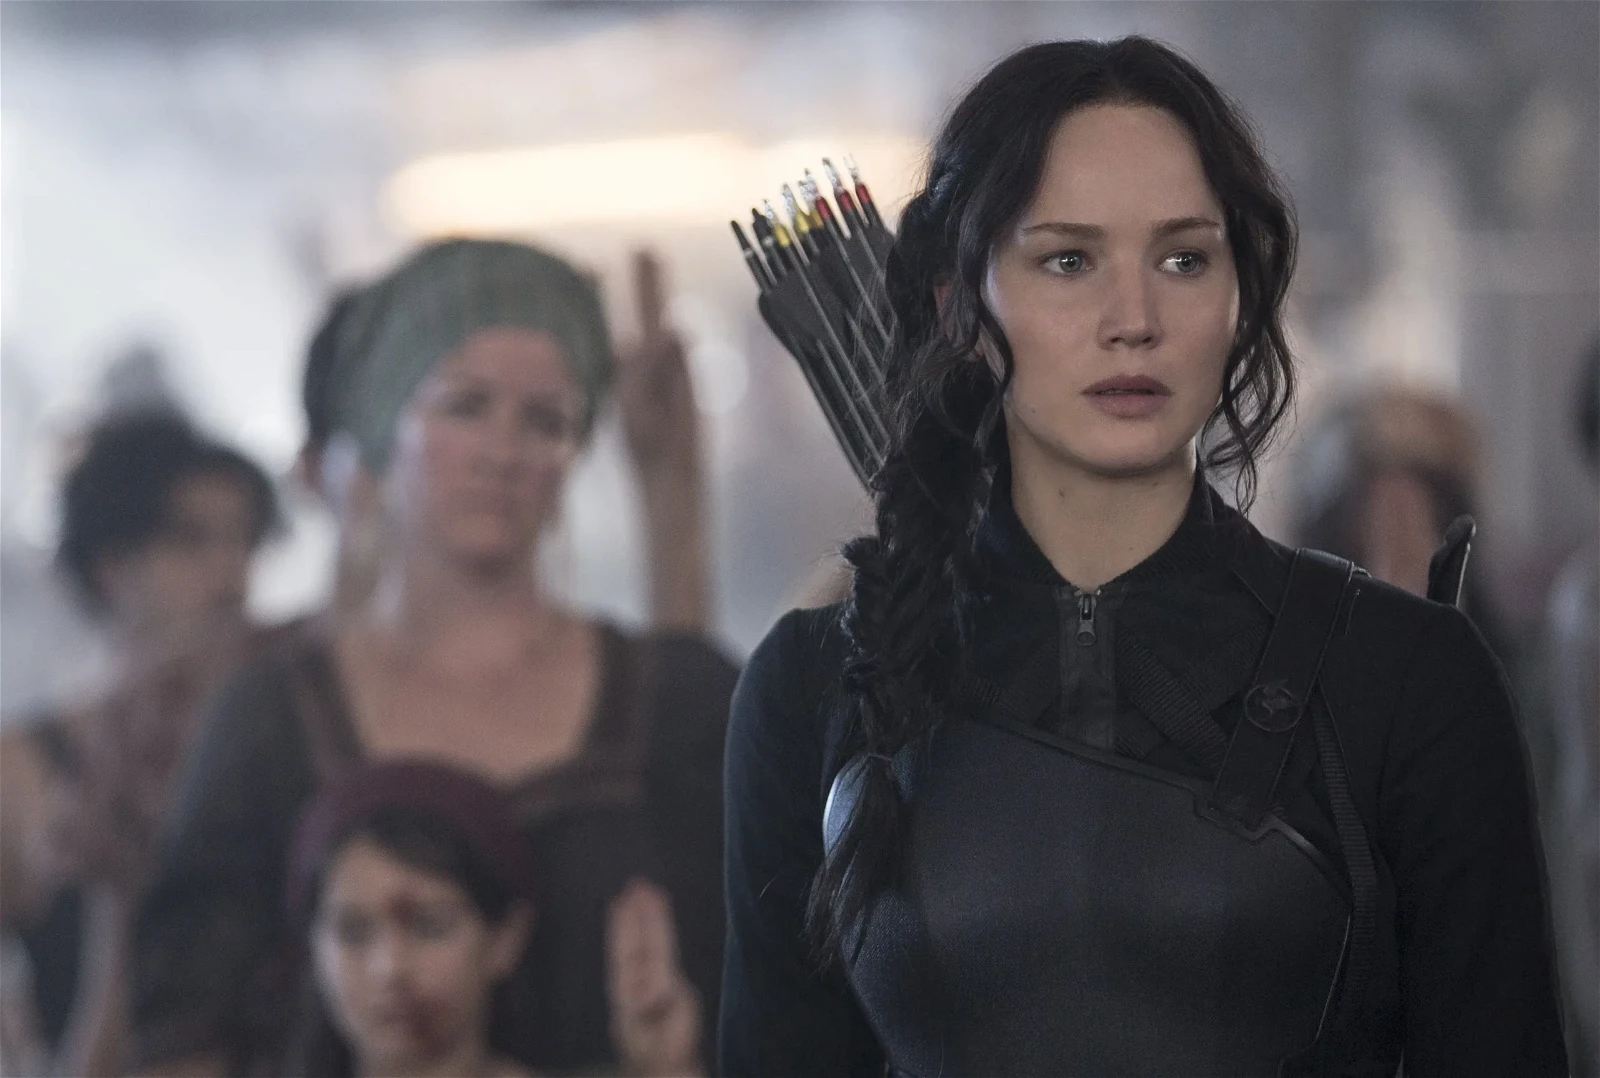 Jennifer Lawrence was ready with her bow and arrow as Katniss Everdeen to spoil a robbery at her home